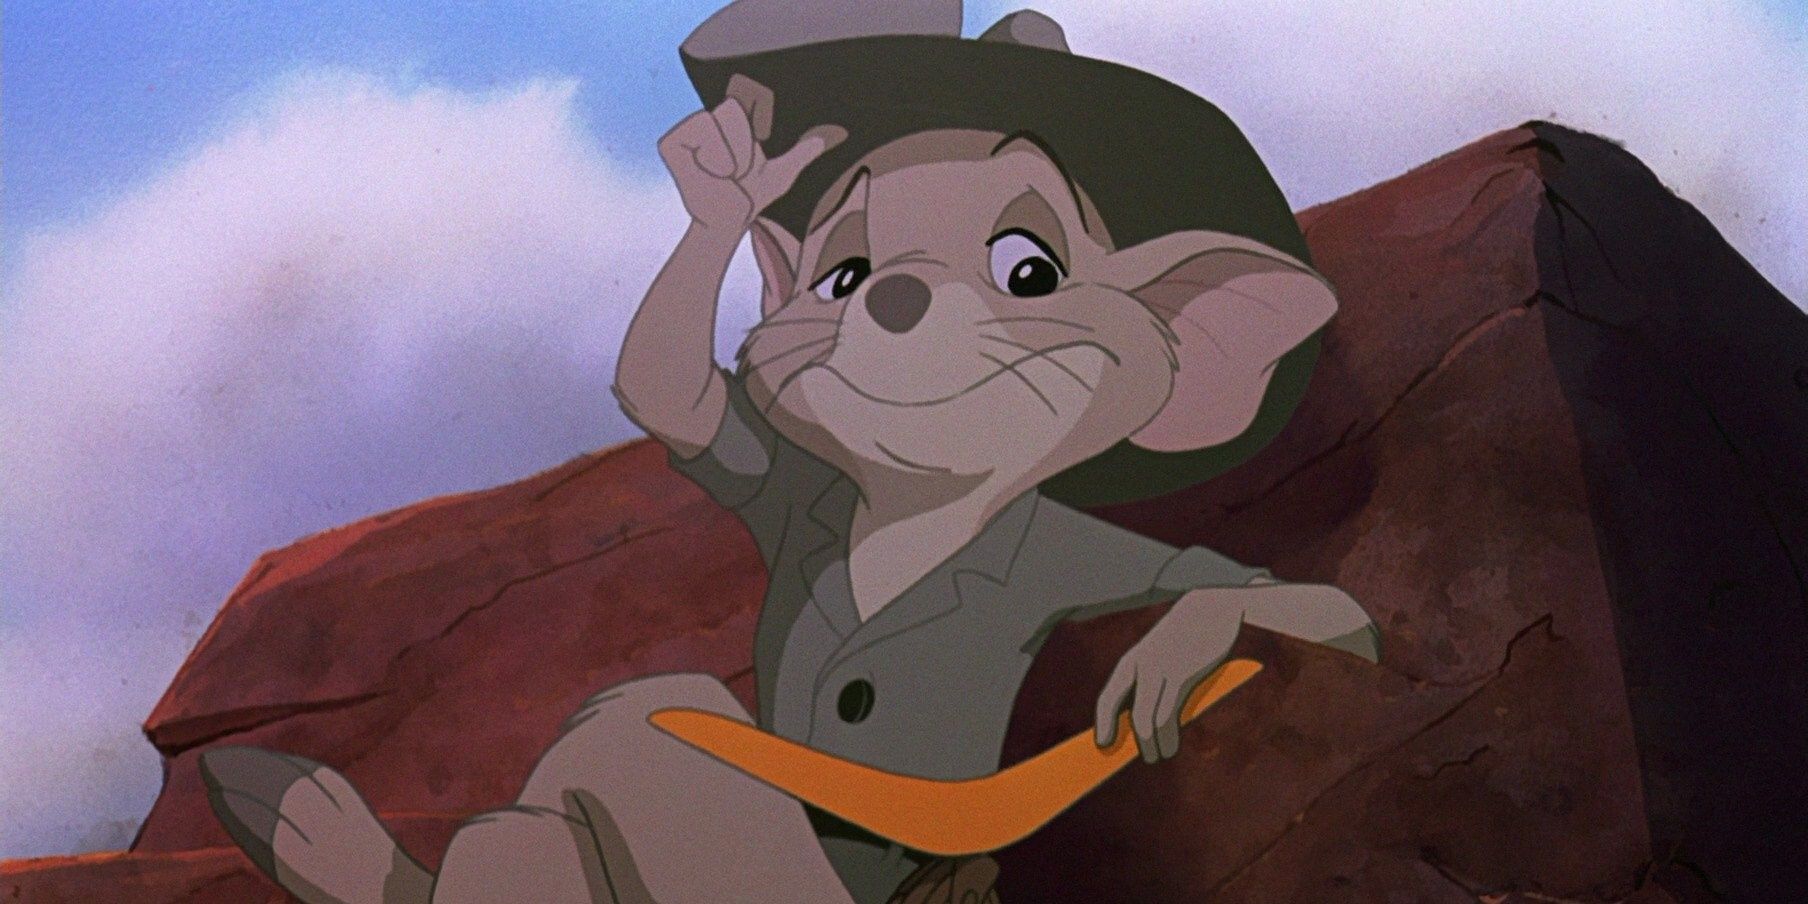 Jakes sitting on a rock in The Rescuers Down Under